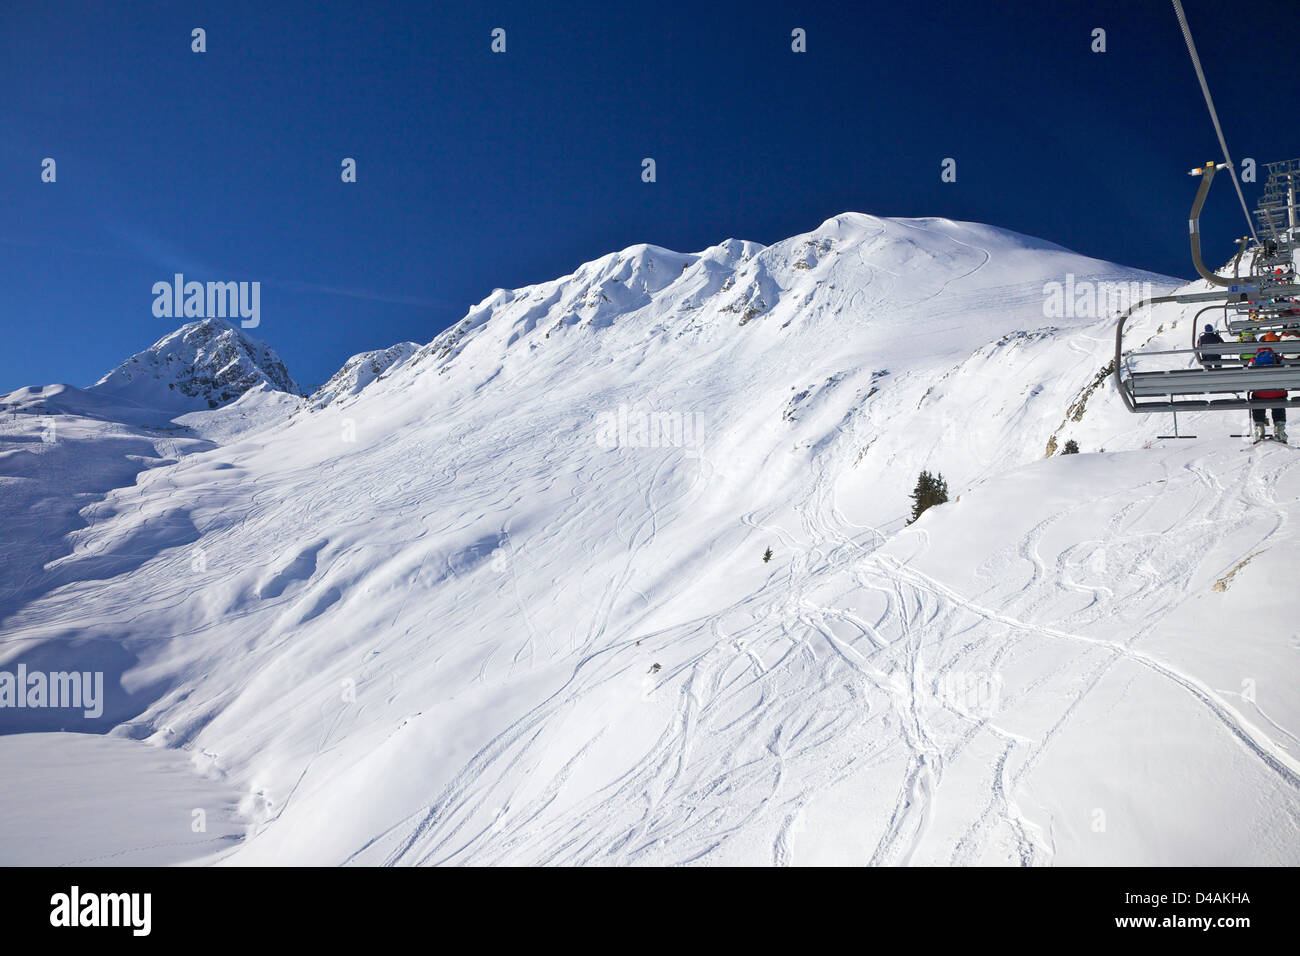 Mountain views from chair-lift early morning in winter, La Plagne, France, Europe Stock Photo